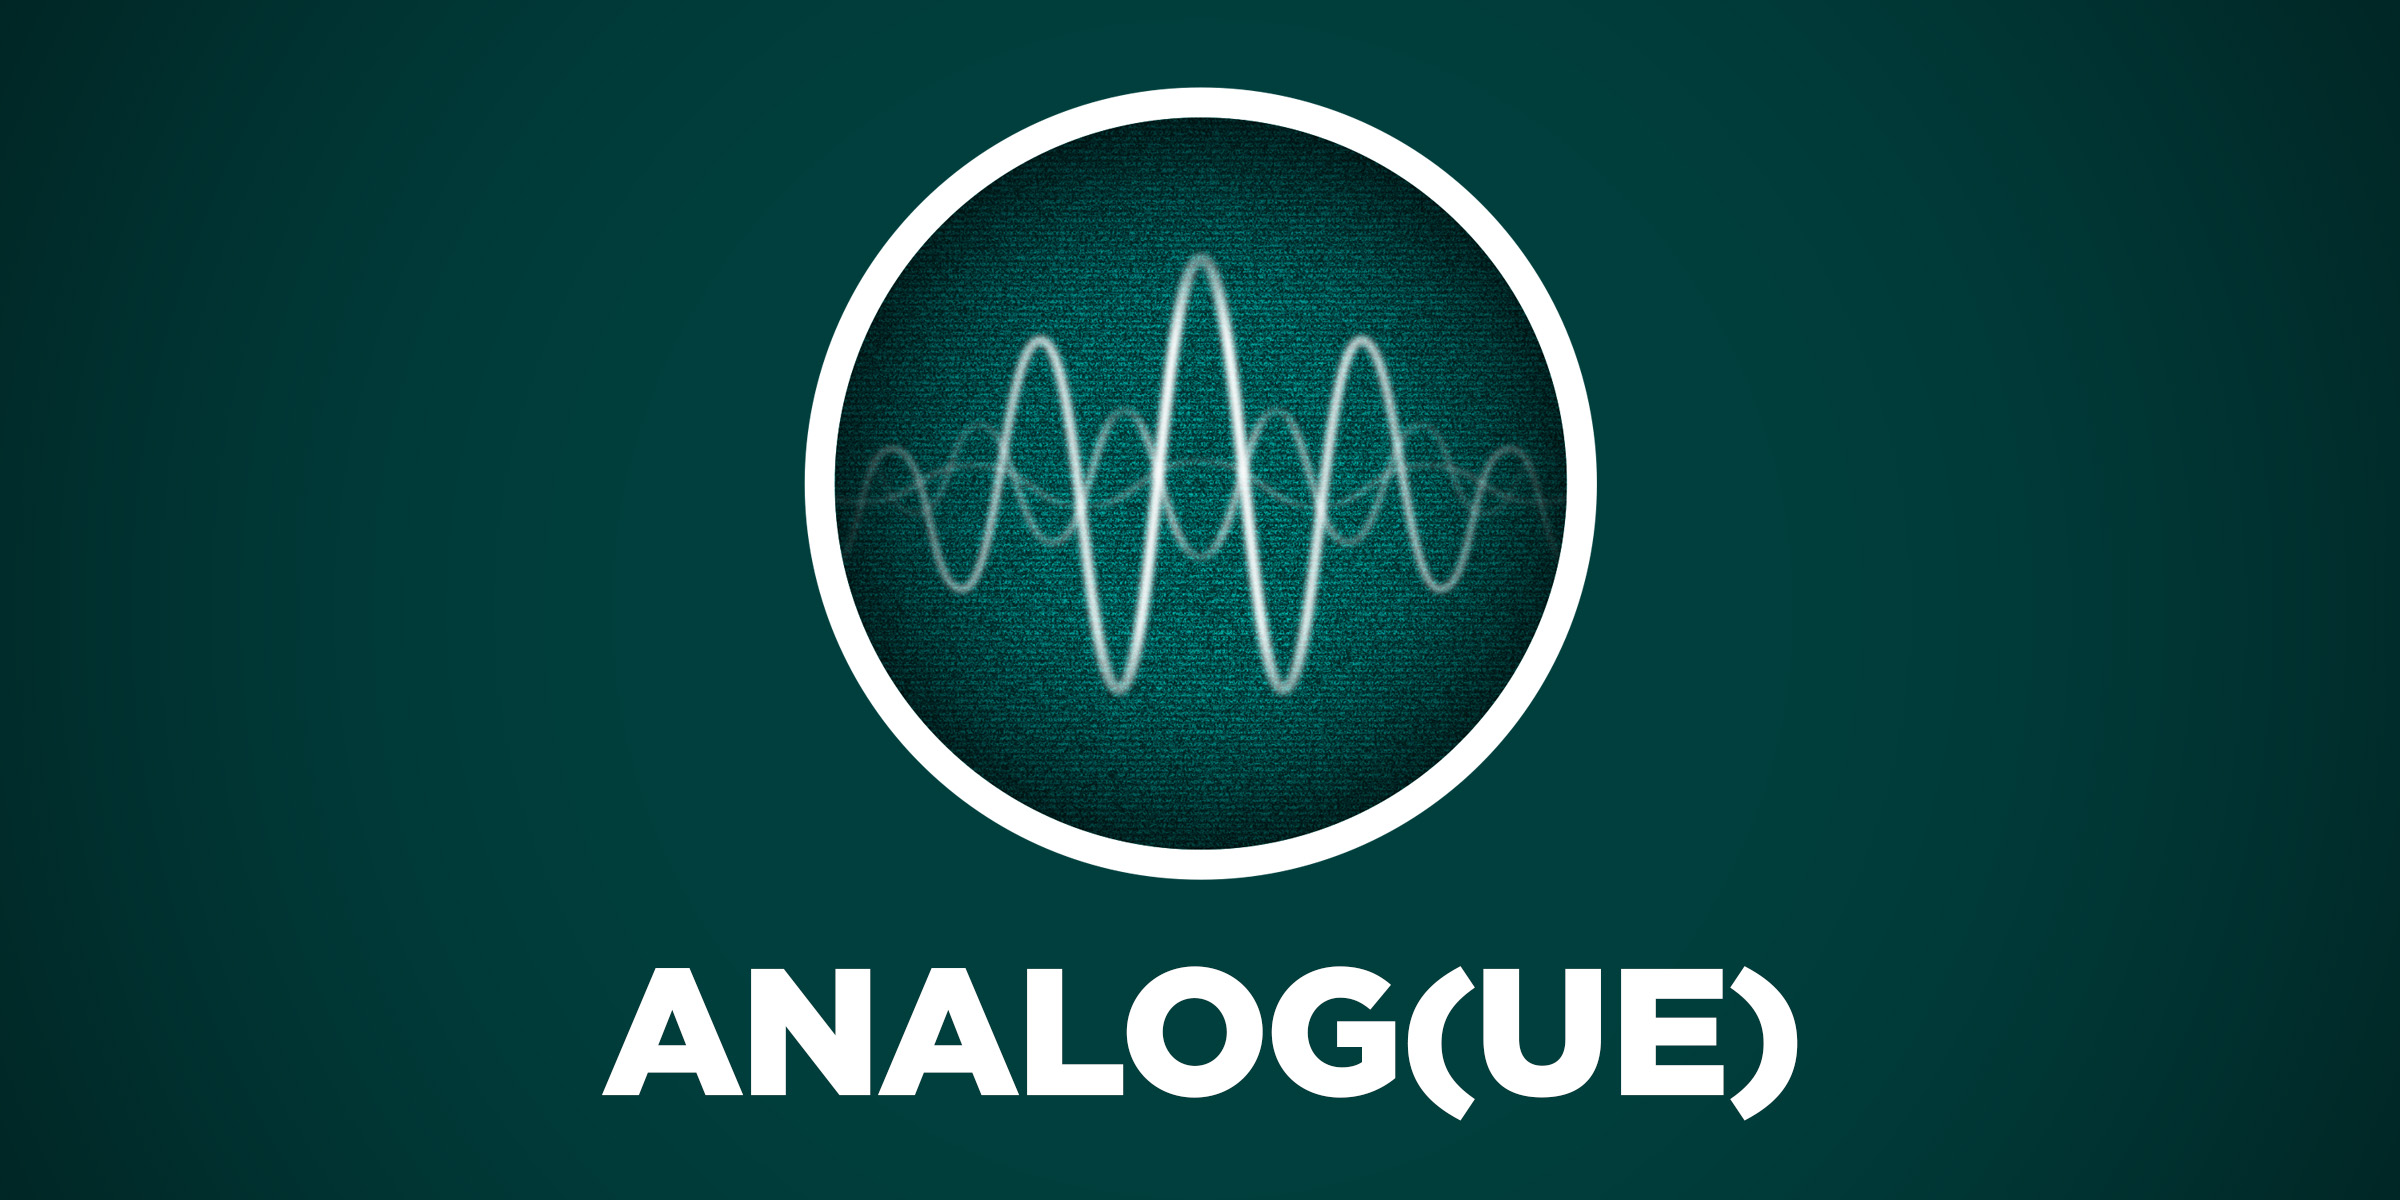 Analog(ue) #217: You Don’t Deserve Me at My Periscope